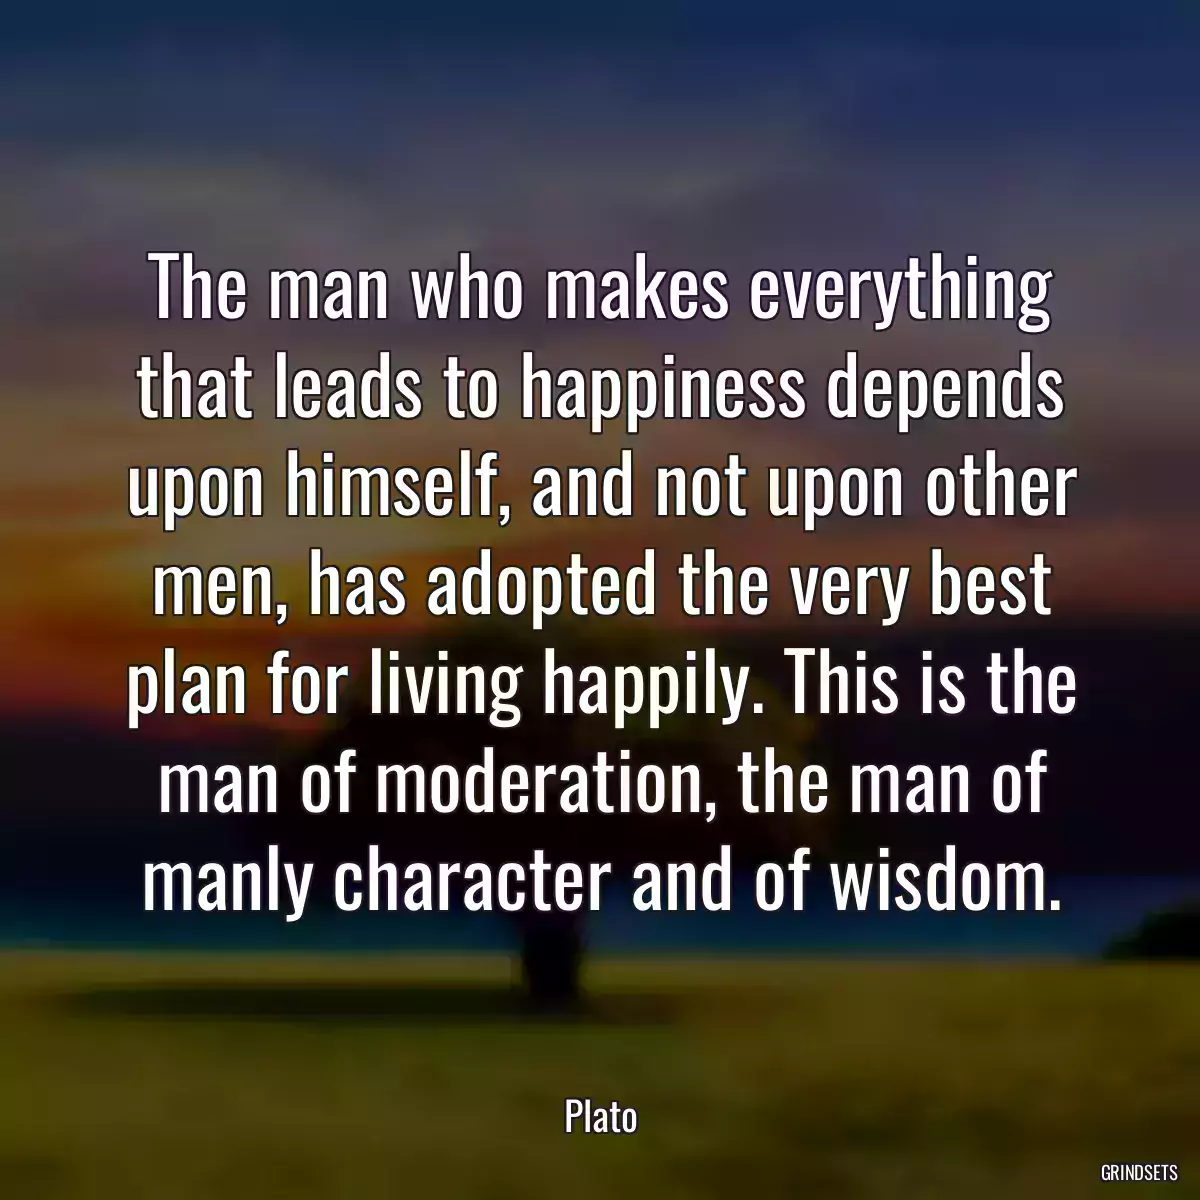 The man who makes everything that leads to happiness depends upon himself, and not upon other men, has adopted the very best plan for living happily. This is the man of moderation, the man of manly character and of wisdom.